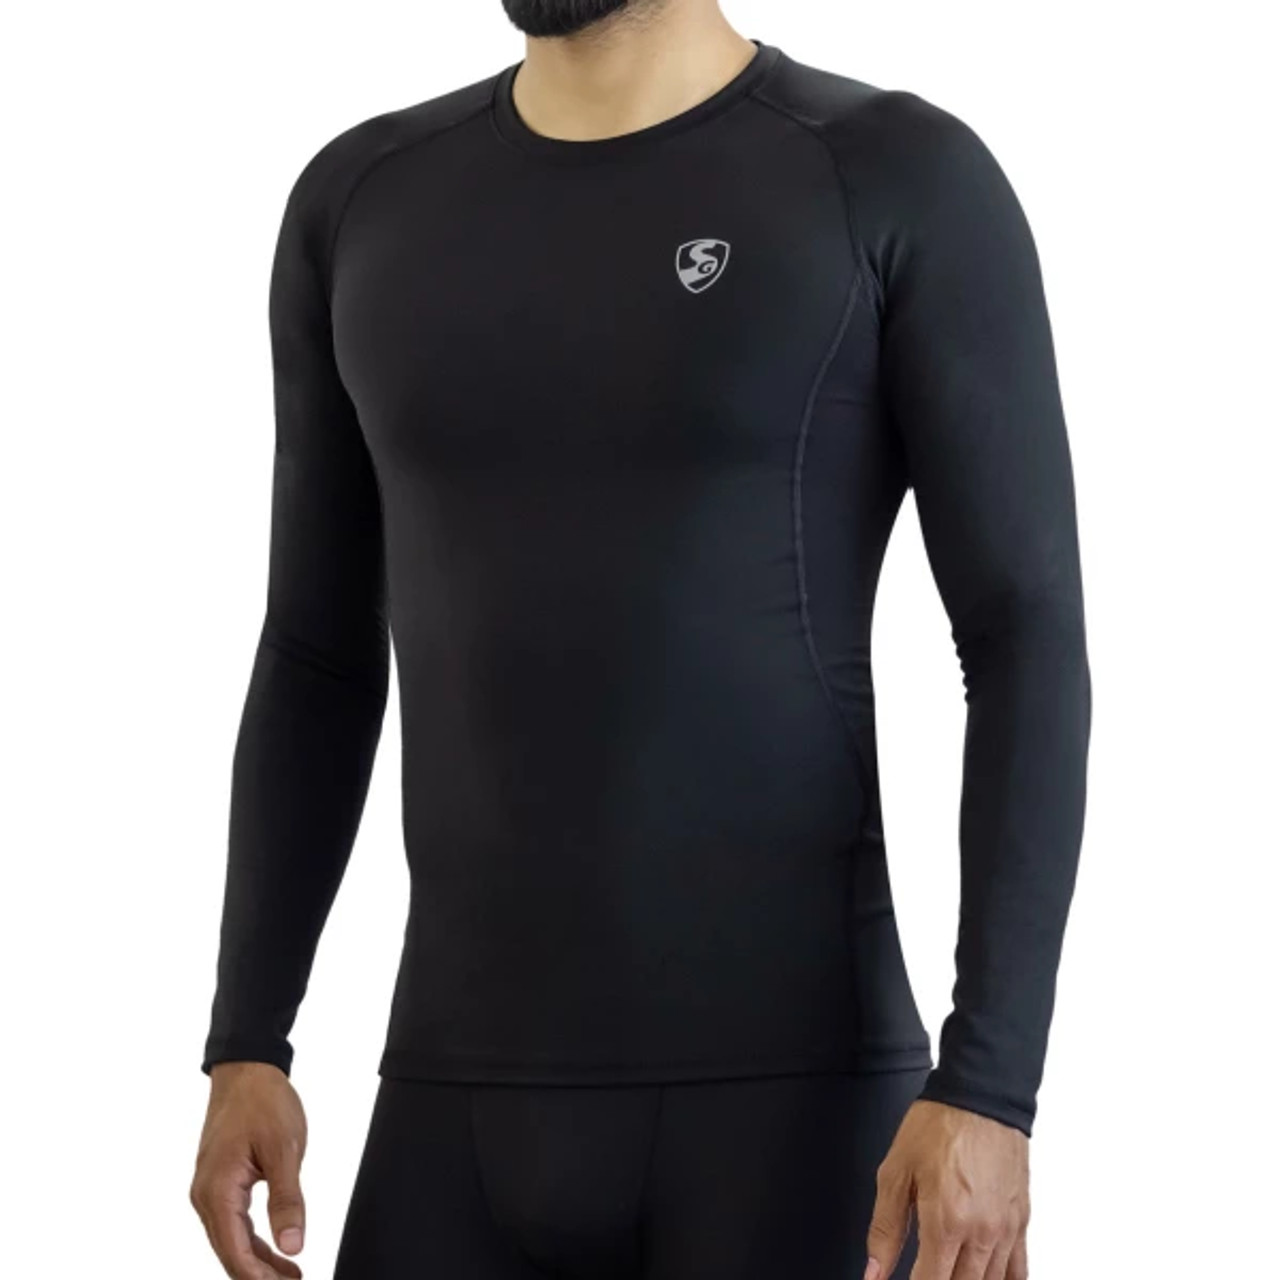 SG Xtreme Skin Fit Base Layer, Buy Online India